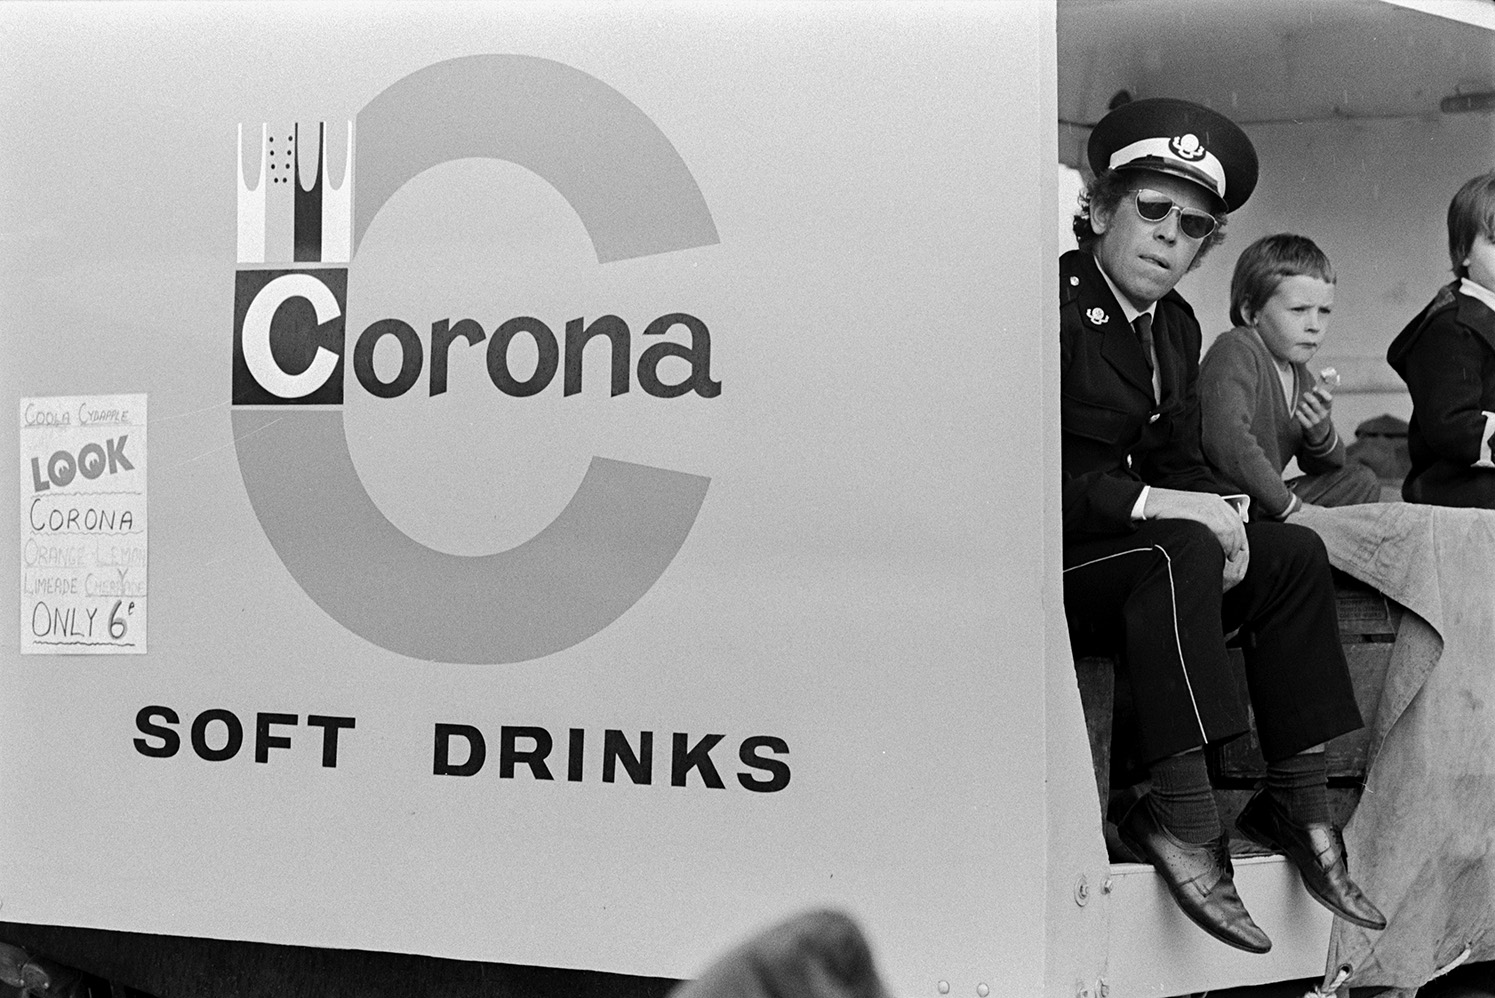 A Corona soft drinks advert on the side of a viewing booth at the Chivenor Air Show at the Royal Marine Base in Braunton. A man in uniform, possibly a pilot, is sat inside the booth with two children.